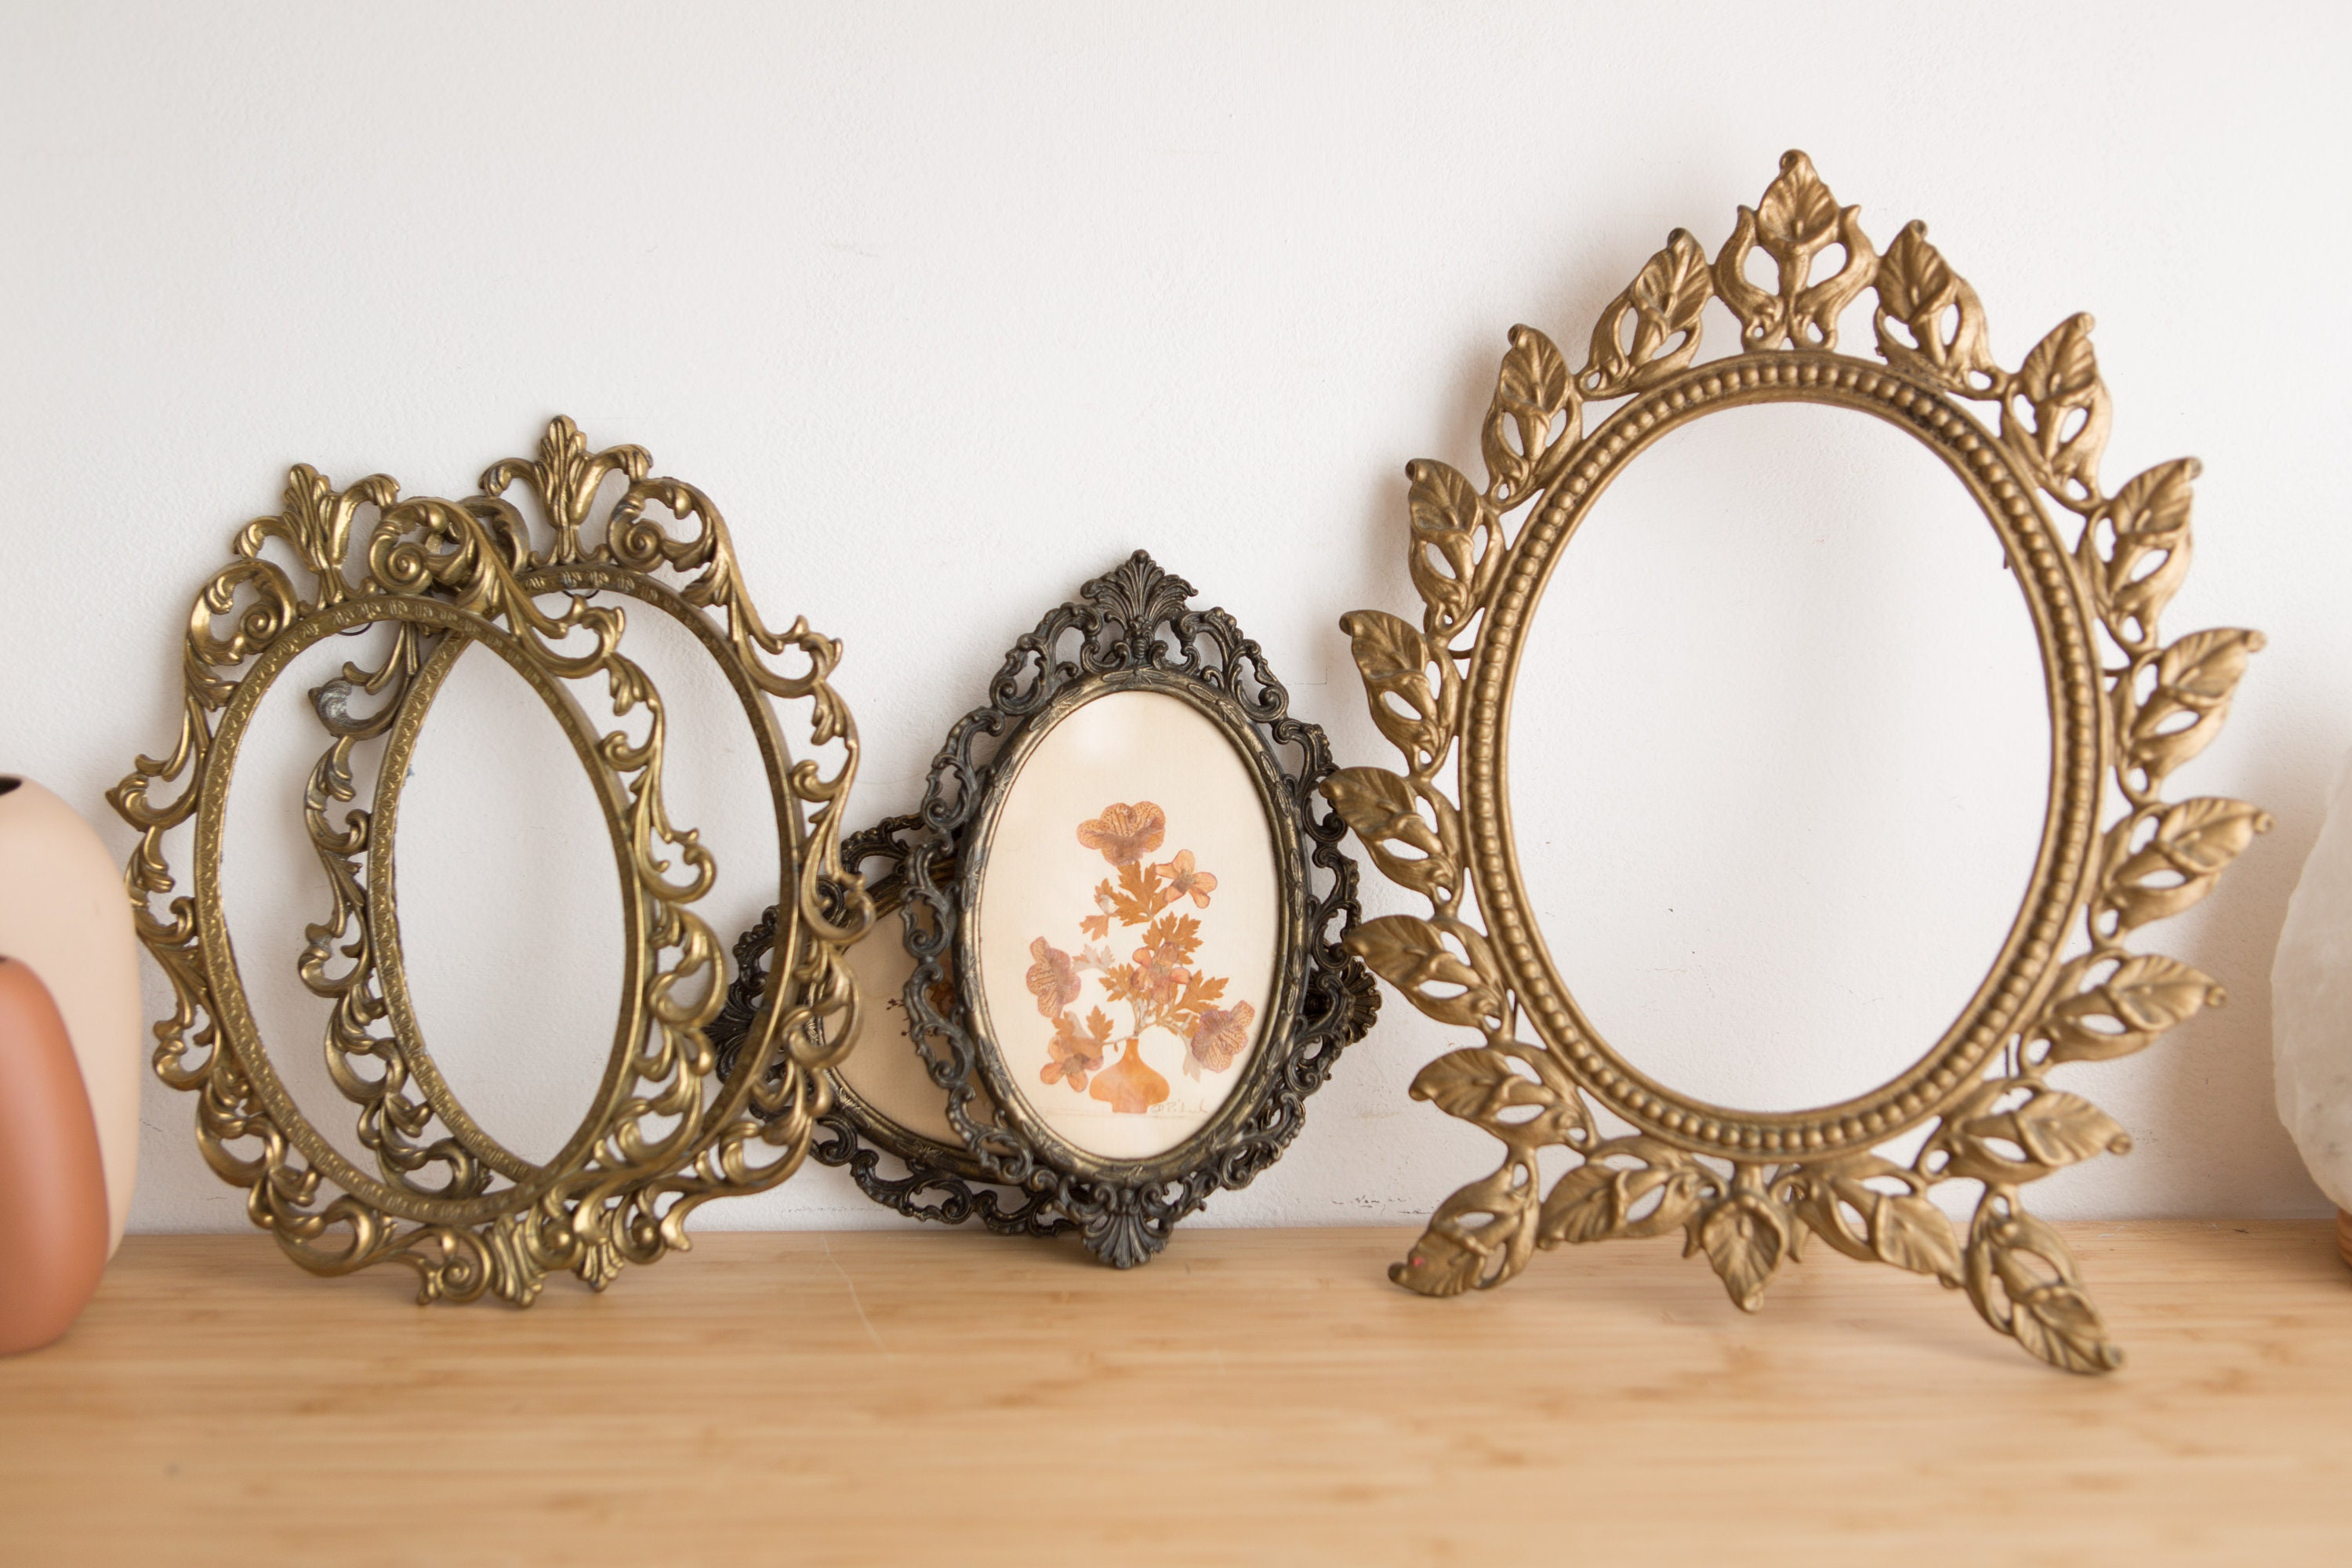 Vintage Oval Frames - 5 Gold and bronze Colored Small Metal Picture Frames